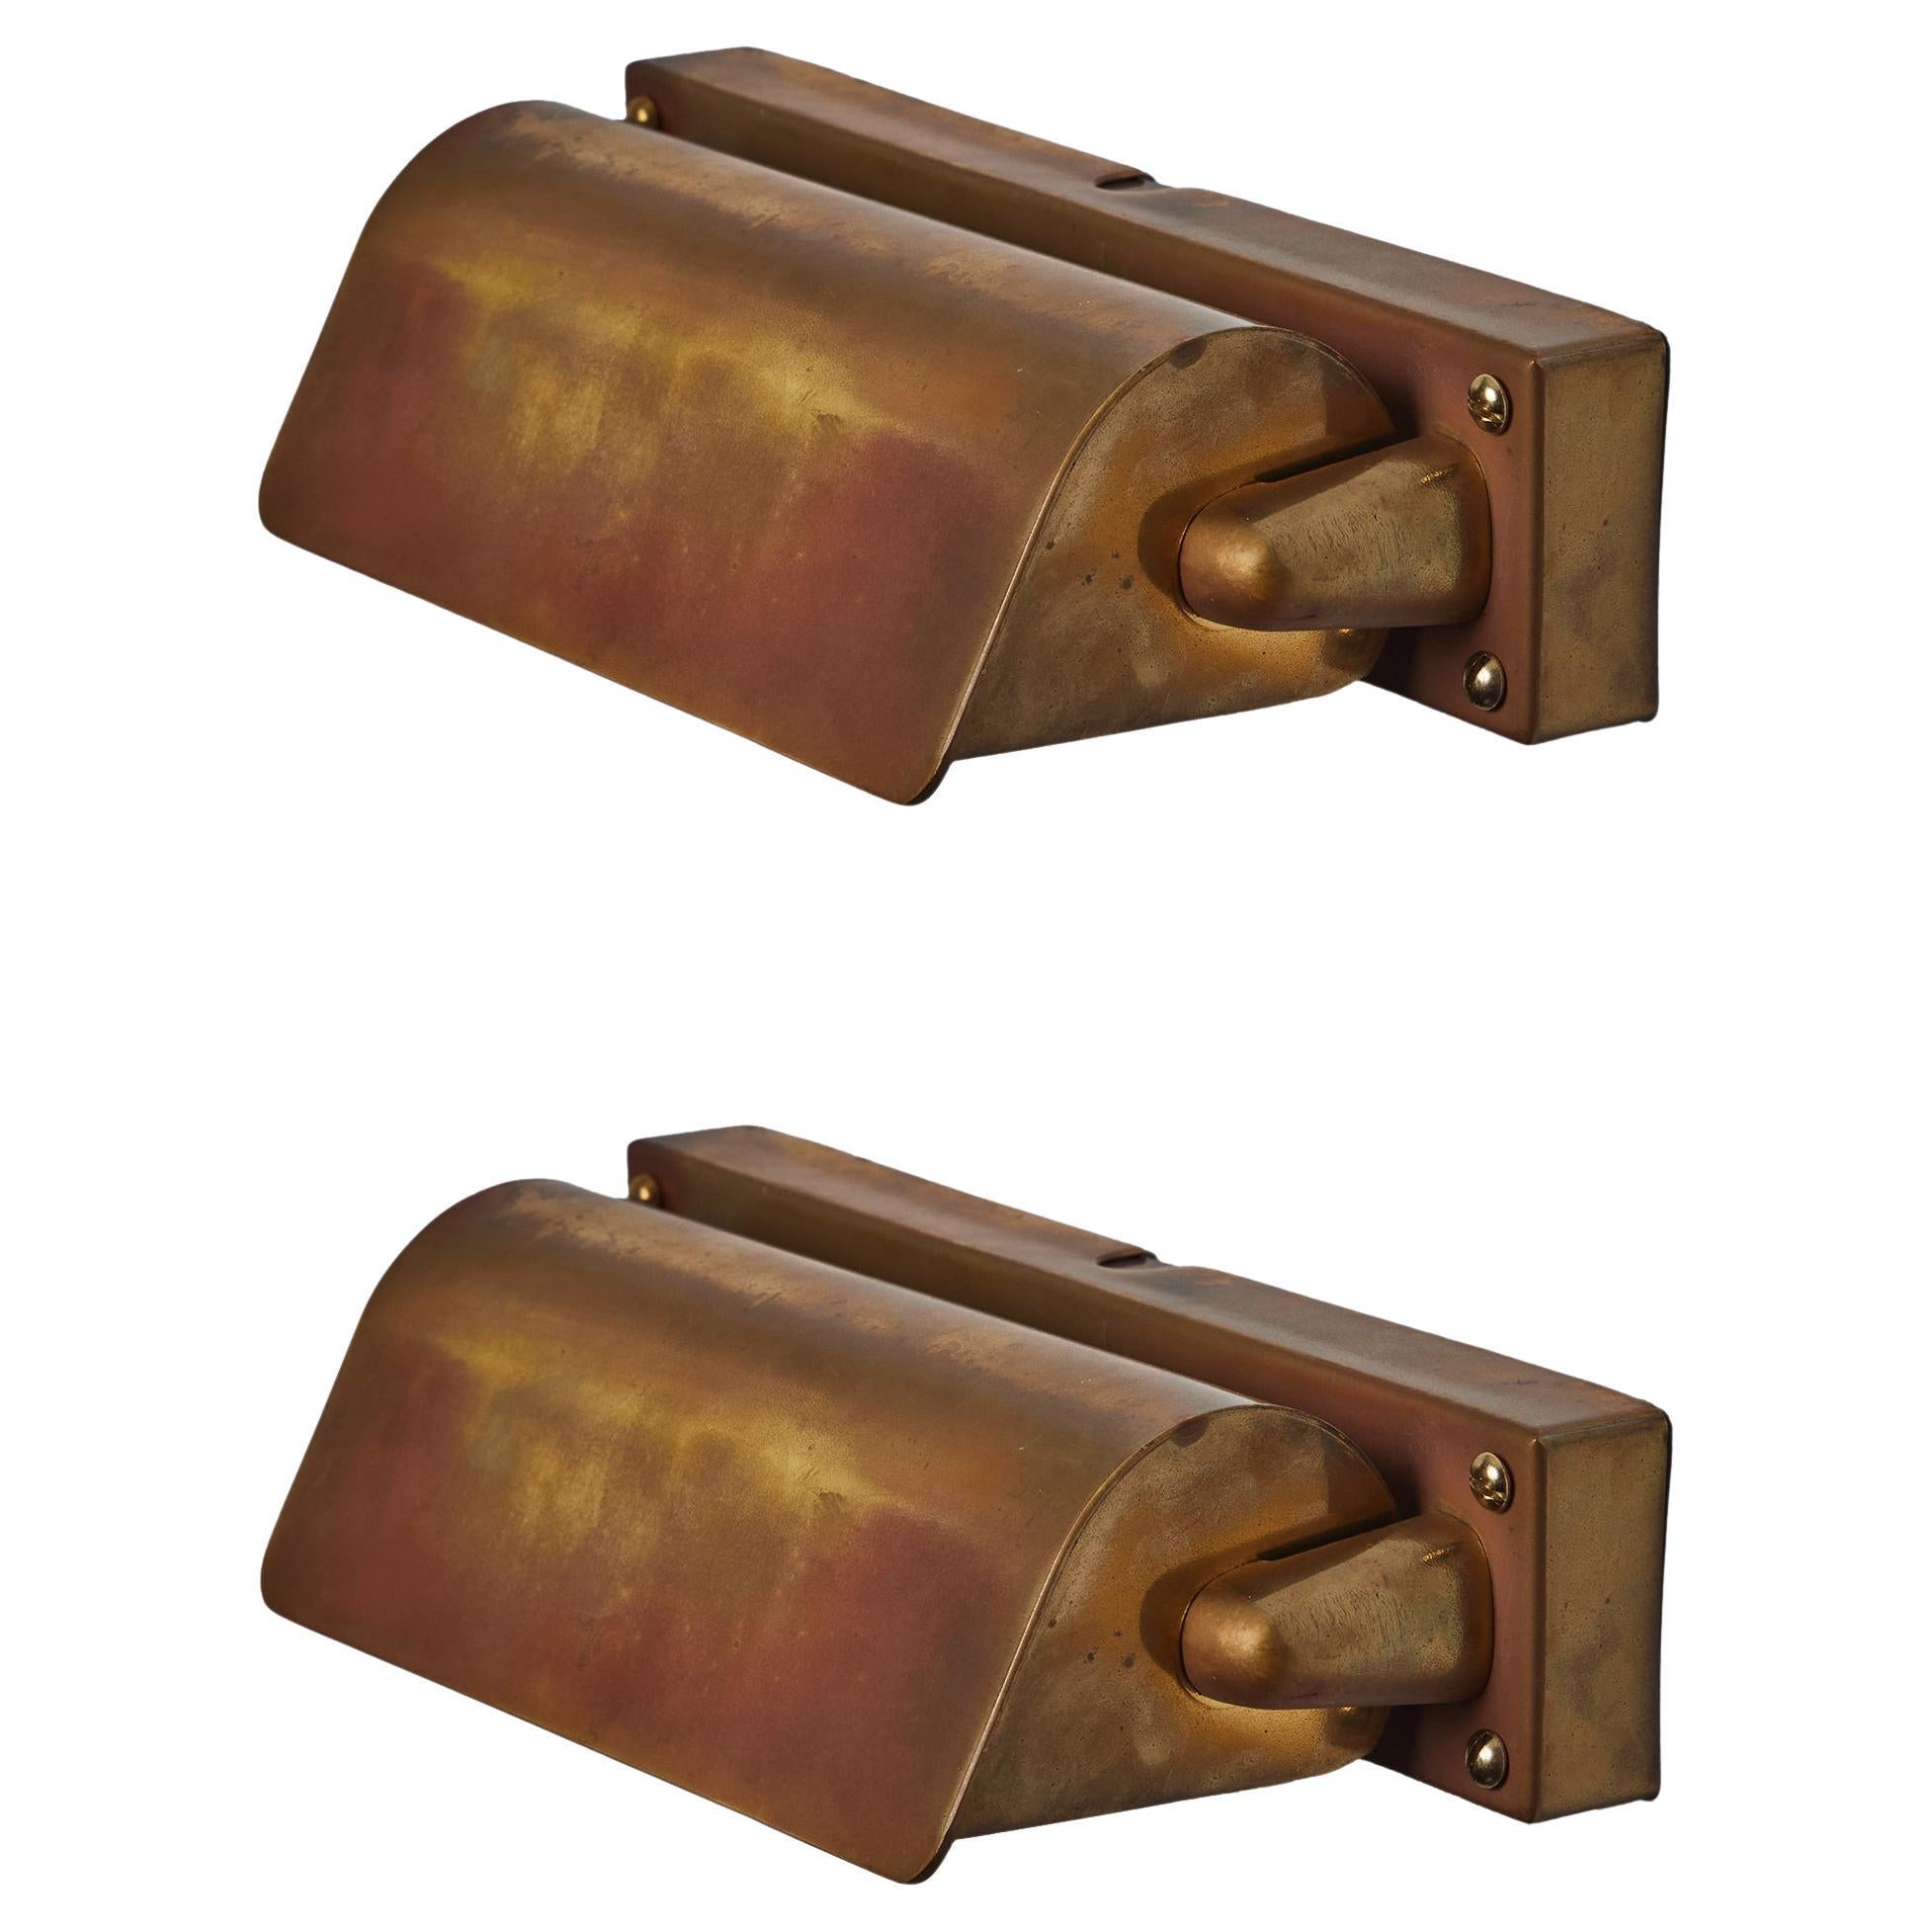 Pair of 1930s Finnish Patinated Brass Wall Lights Attributed to Paavo Tynell